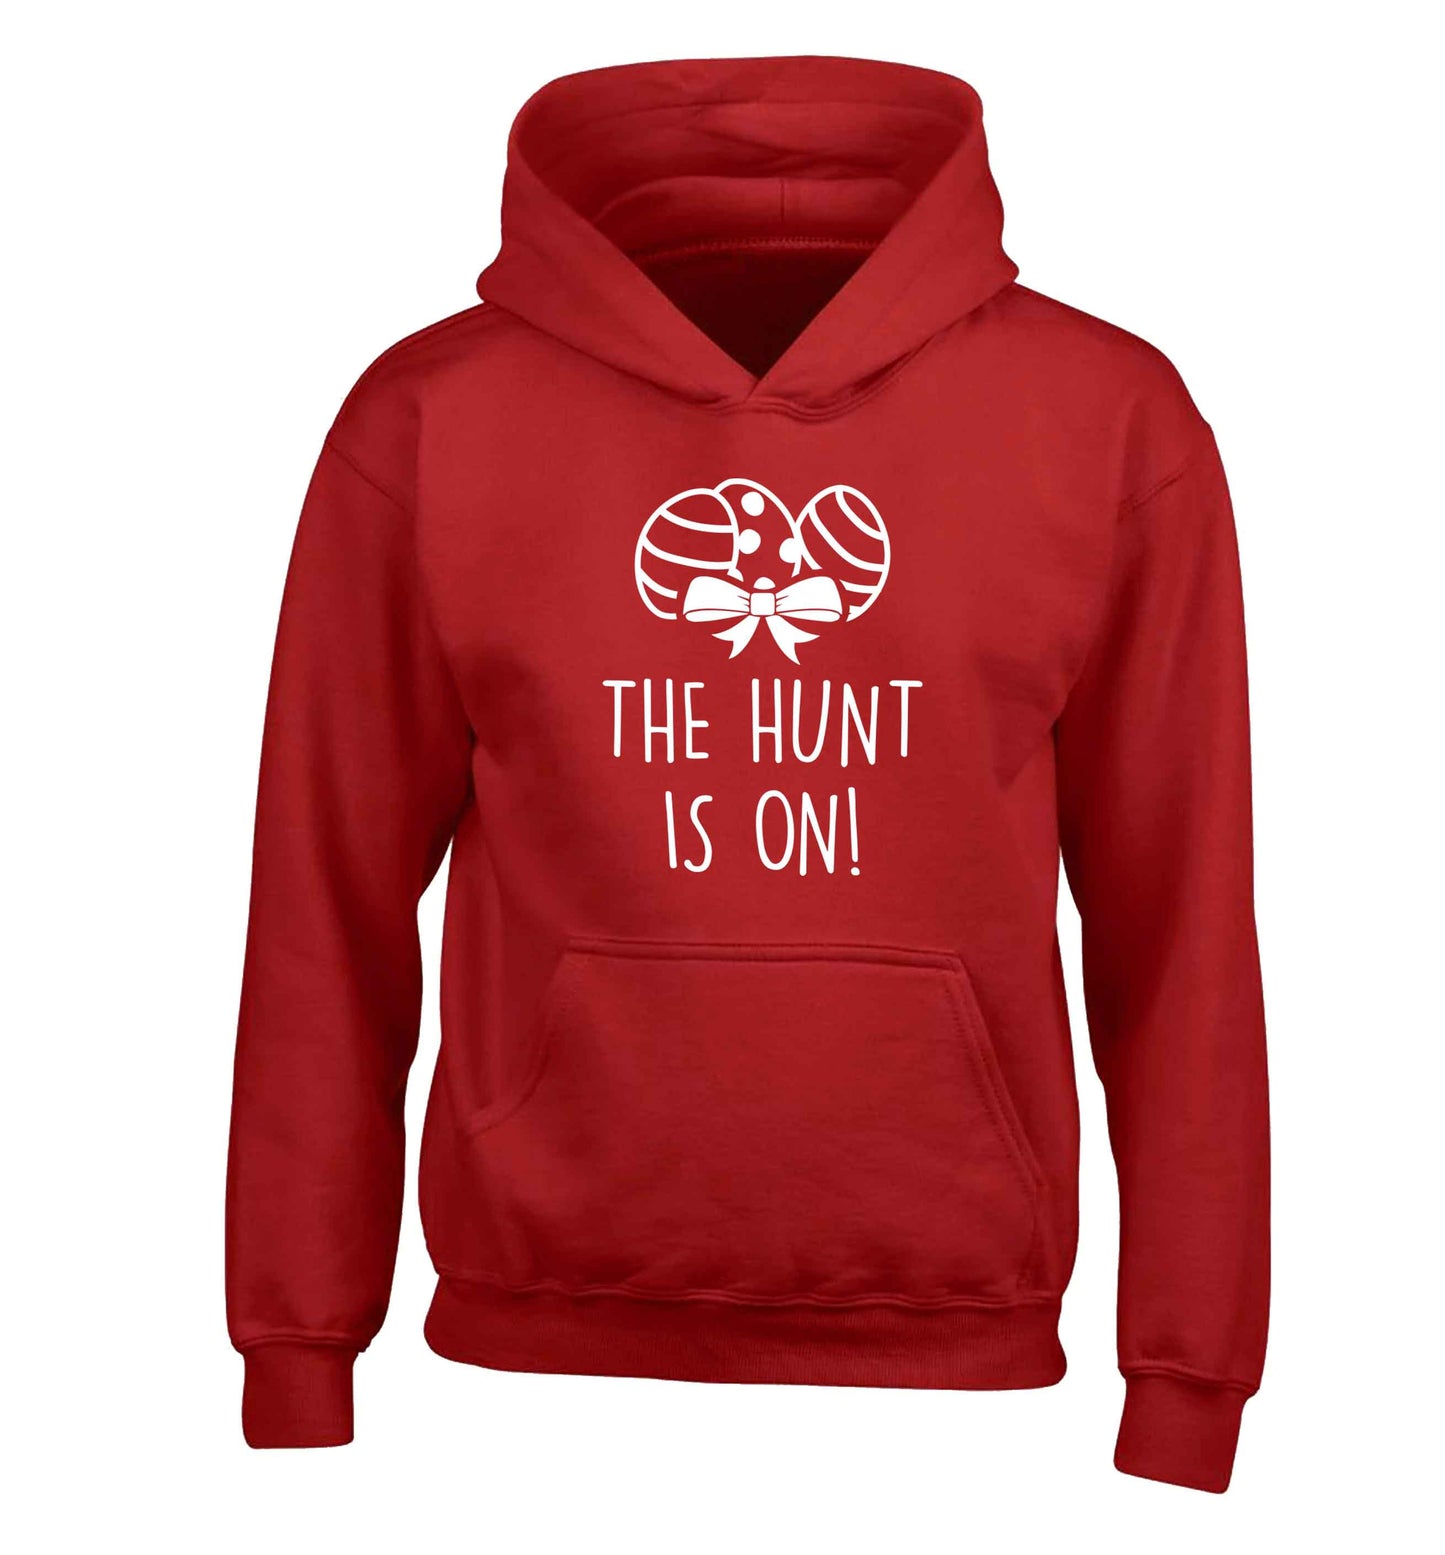 The hunt is on children's red hoodie 12-13 Years